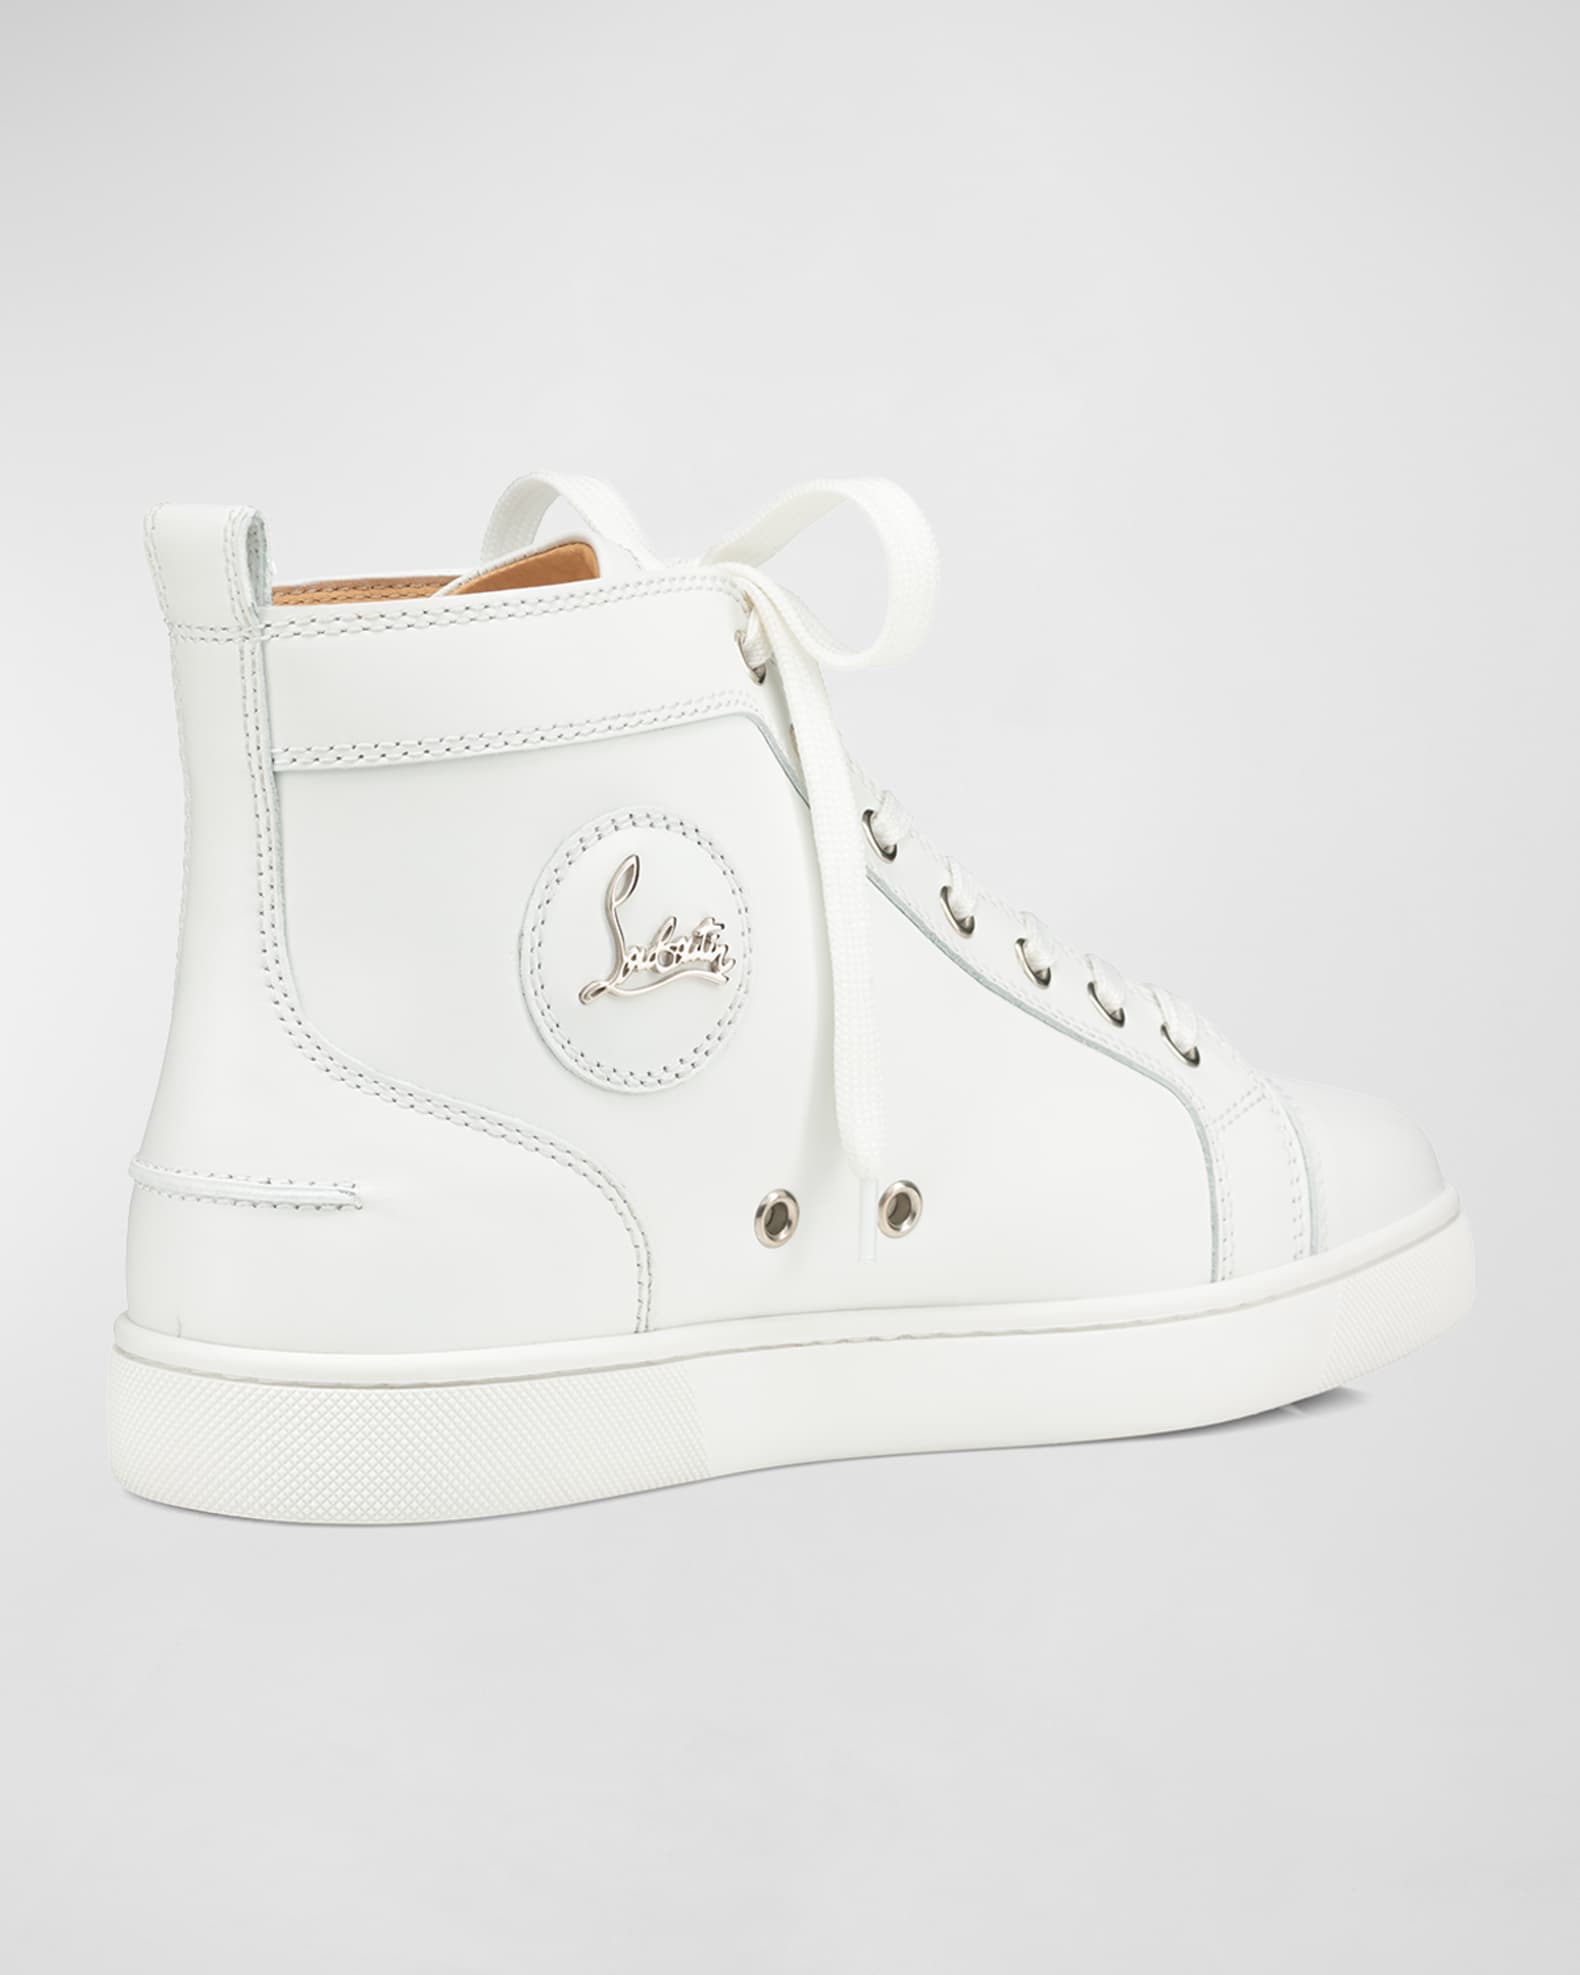 Christian Louboutin Men's Louis Leather High-Top Sneakers | Neiman Marcus